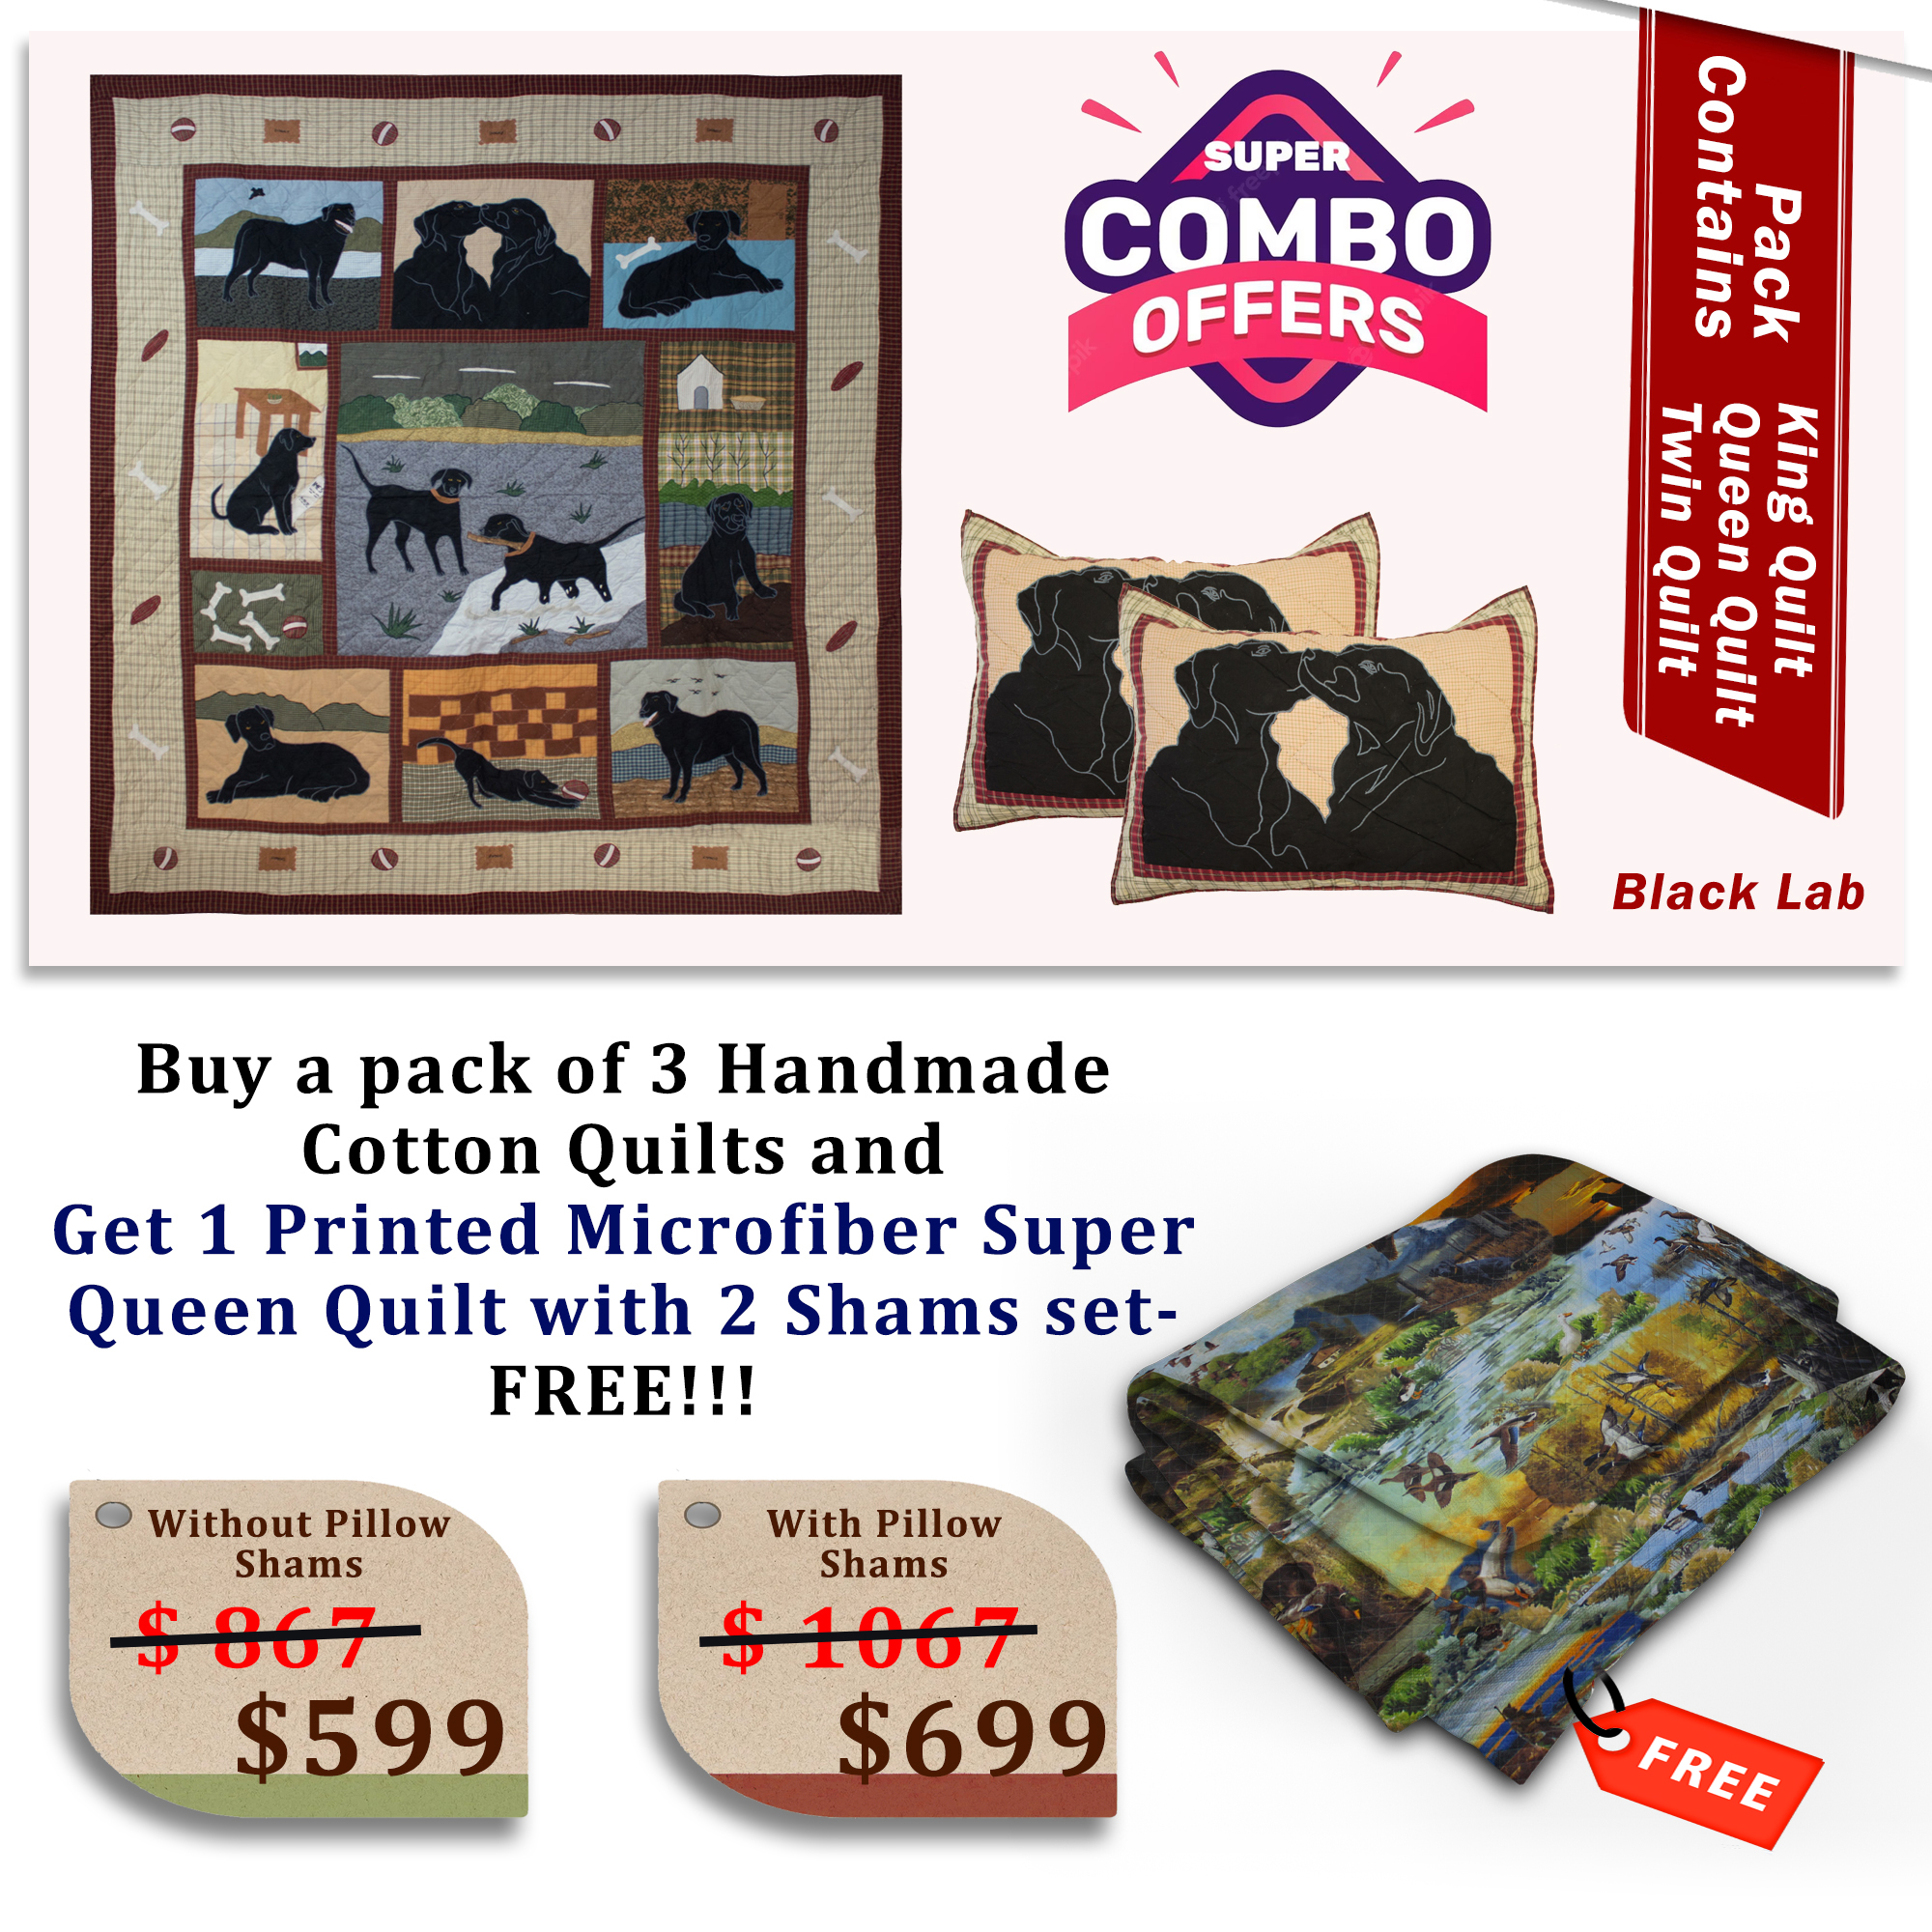  Black Lab - Handmade Cotton quilts | Buy 3 cotton quilts and get 1 Printed Microfiber Super Queen Quilt with 2 Shams set FREE